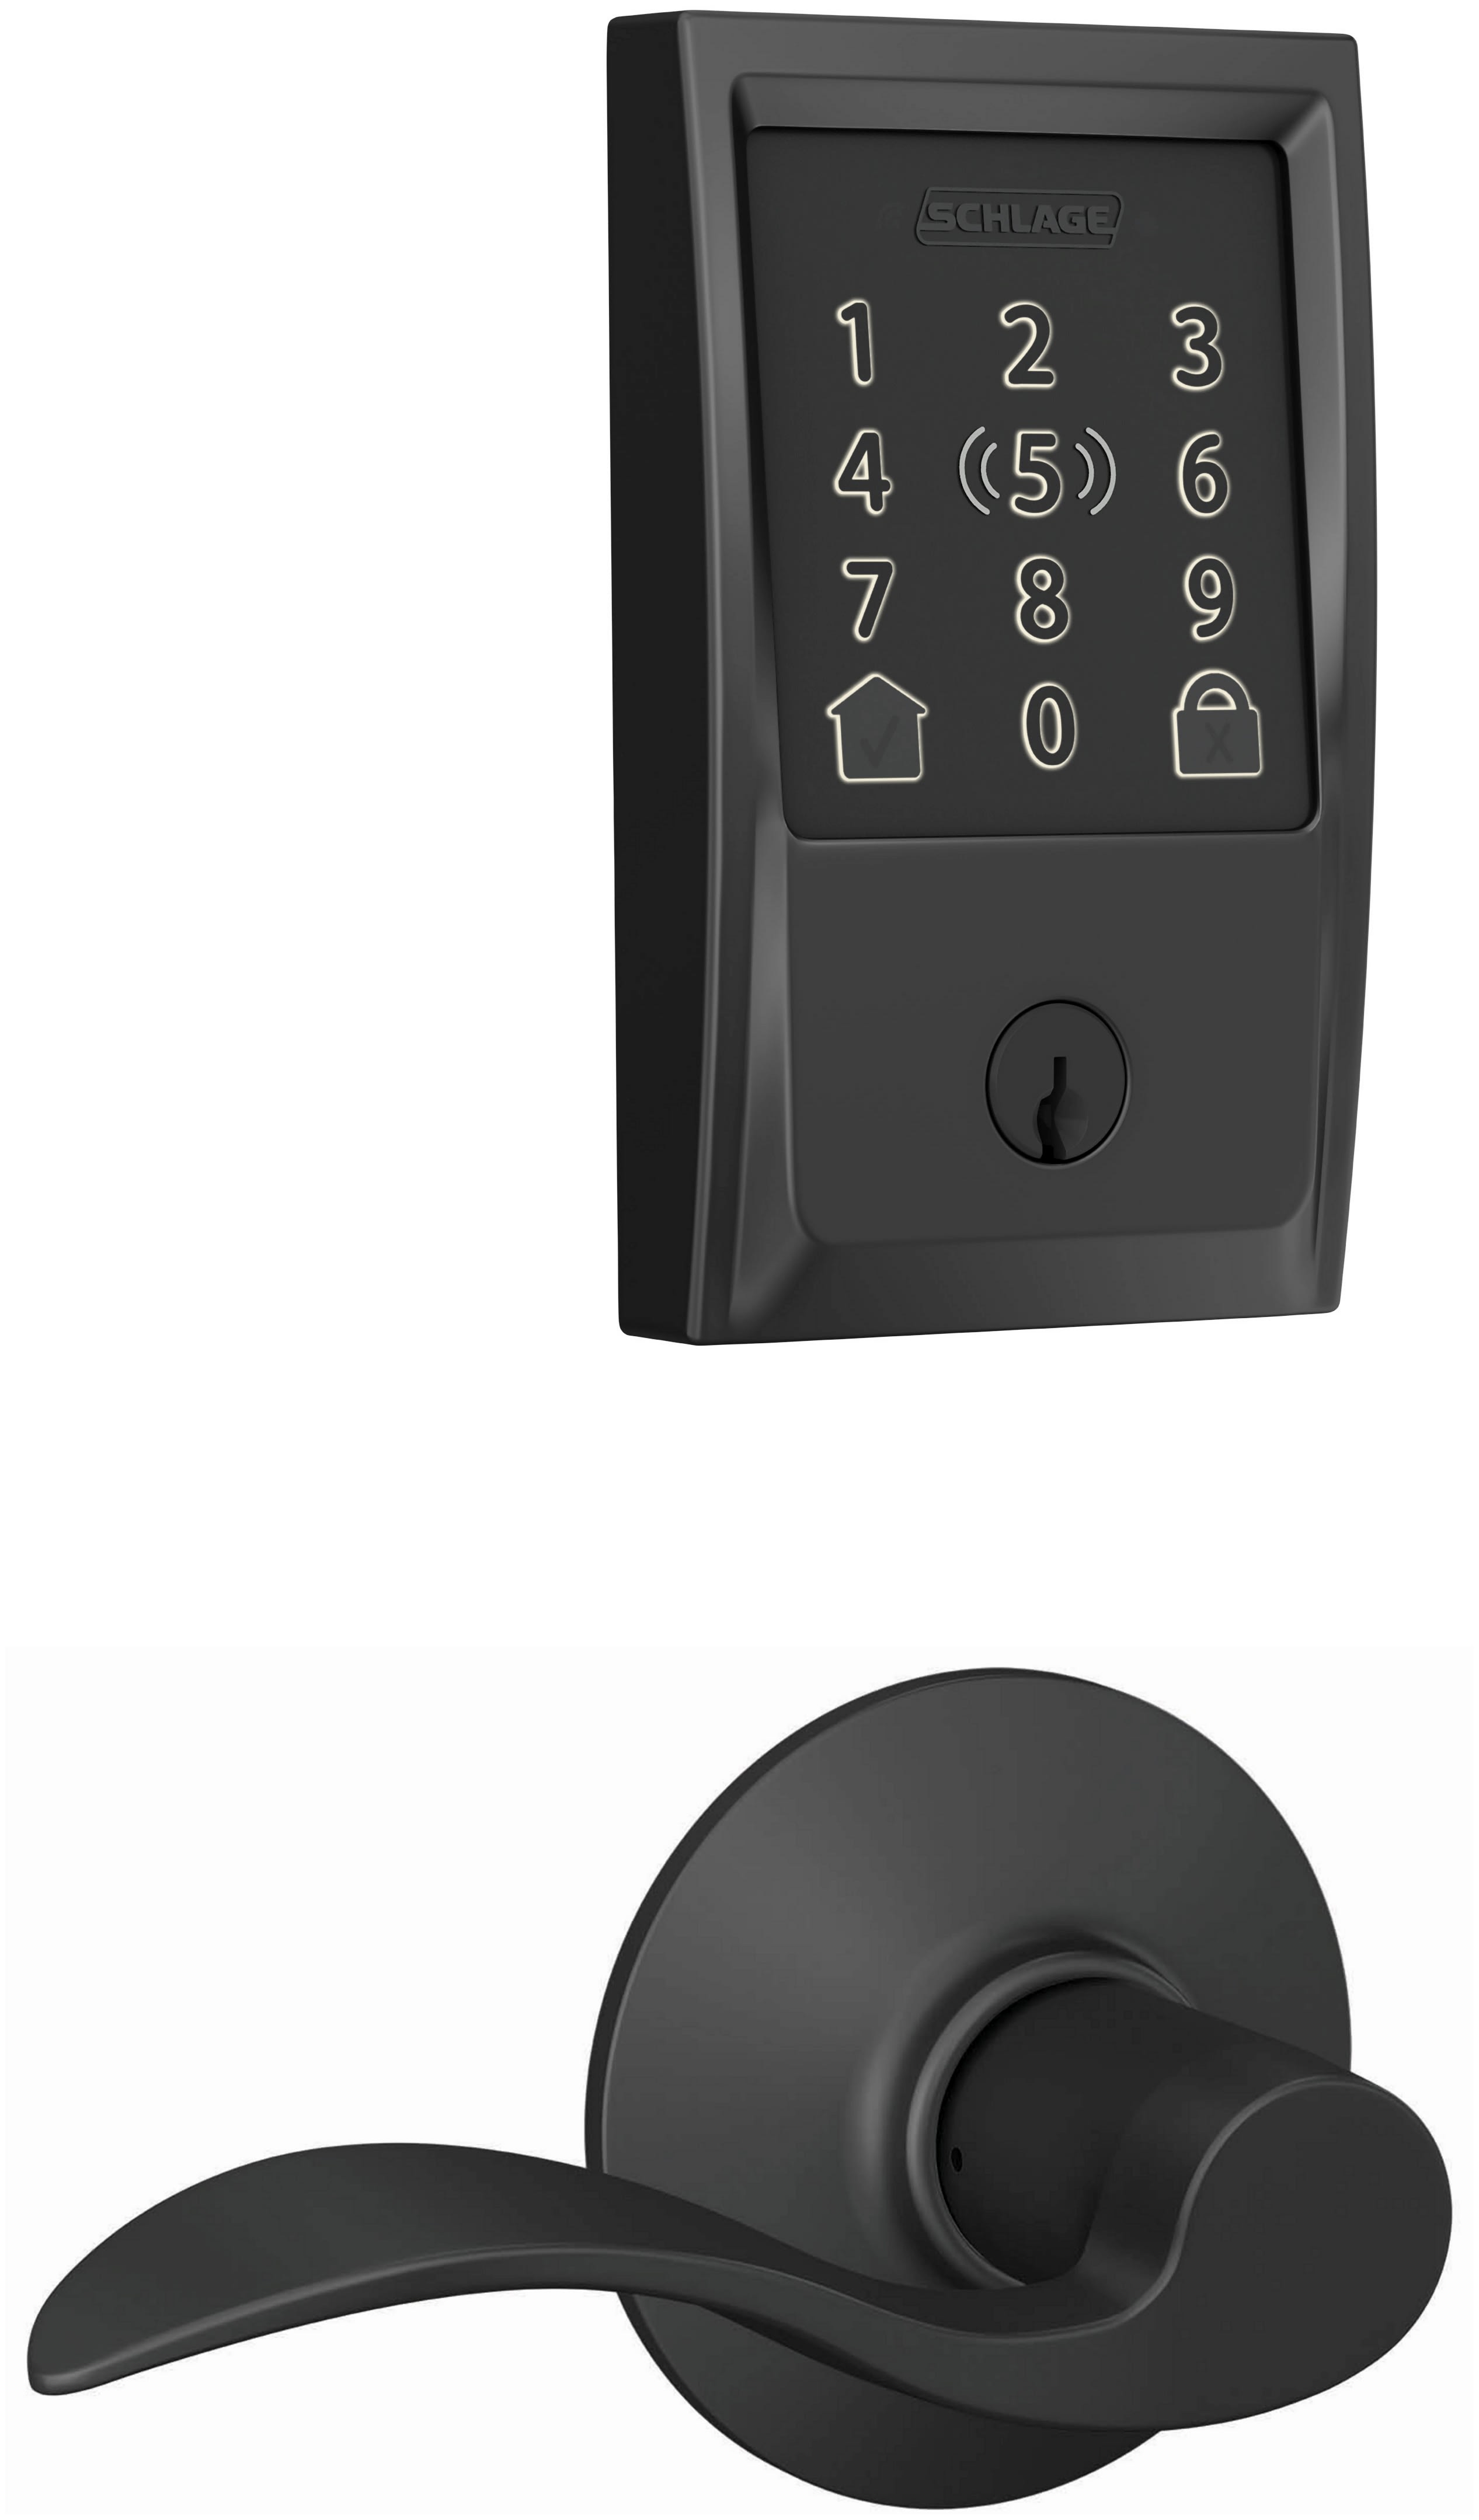 Schlage FBE499WBCENACC716 Aged Bronze Encode Plus Century Electronic  Keyless Entry Deadbolt Combo Pack with Accent Interior Lever and Decorative  Plymouth Trim